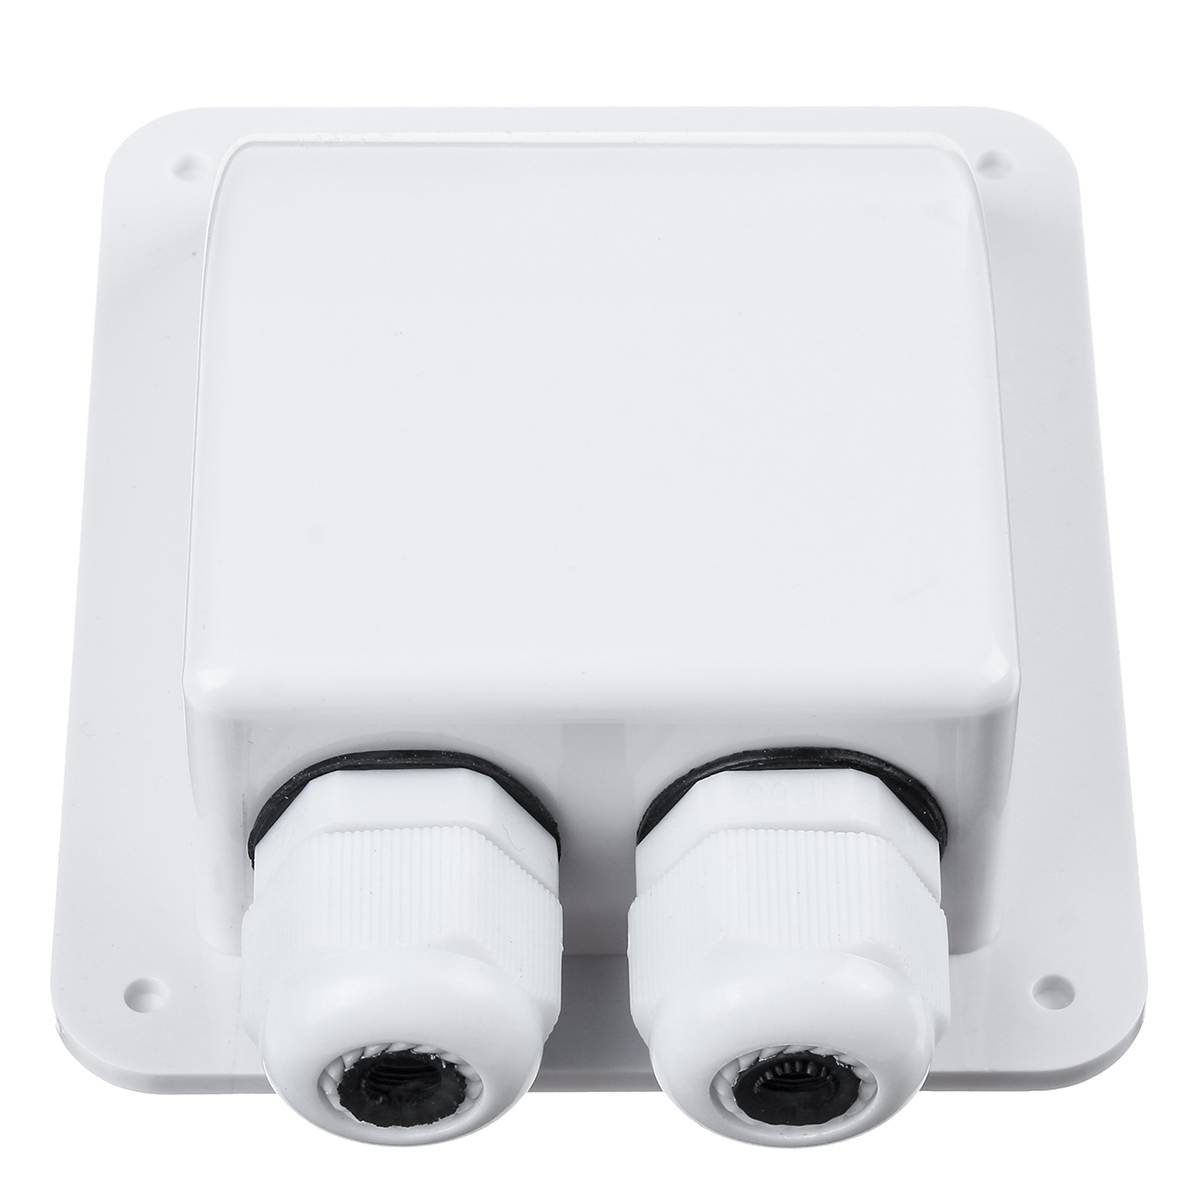 Waterproof ABS Junction Box Double Cable Entry Gland Box 2 Holes For RV Solar Panel Motorhomes Caravans Boats